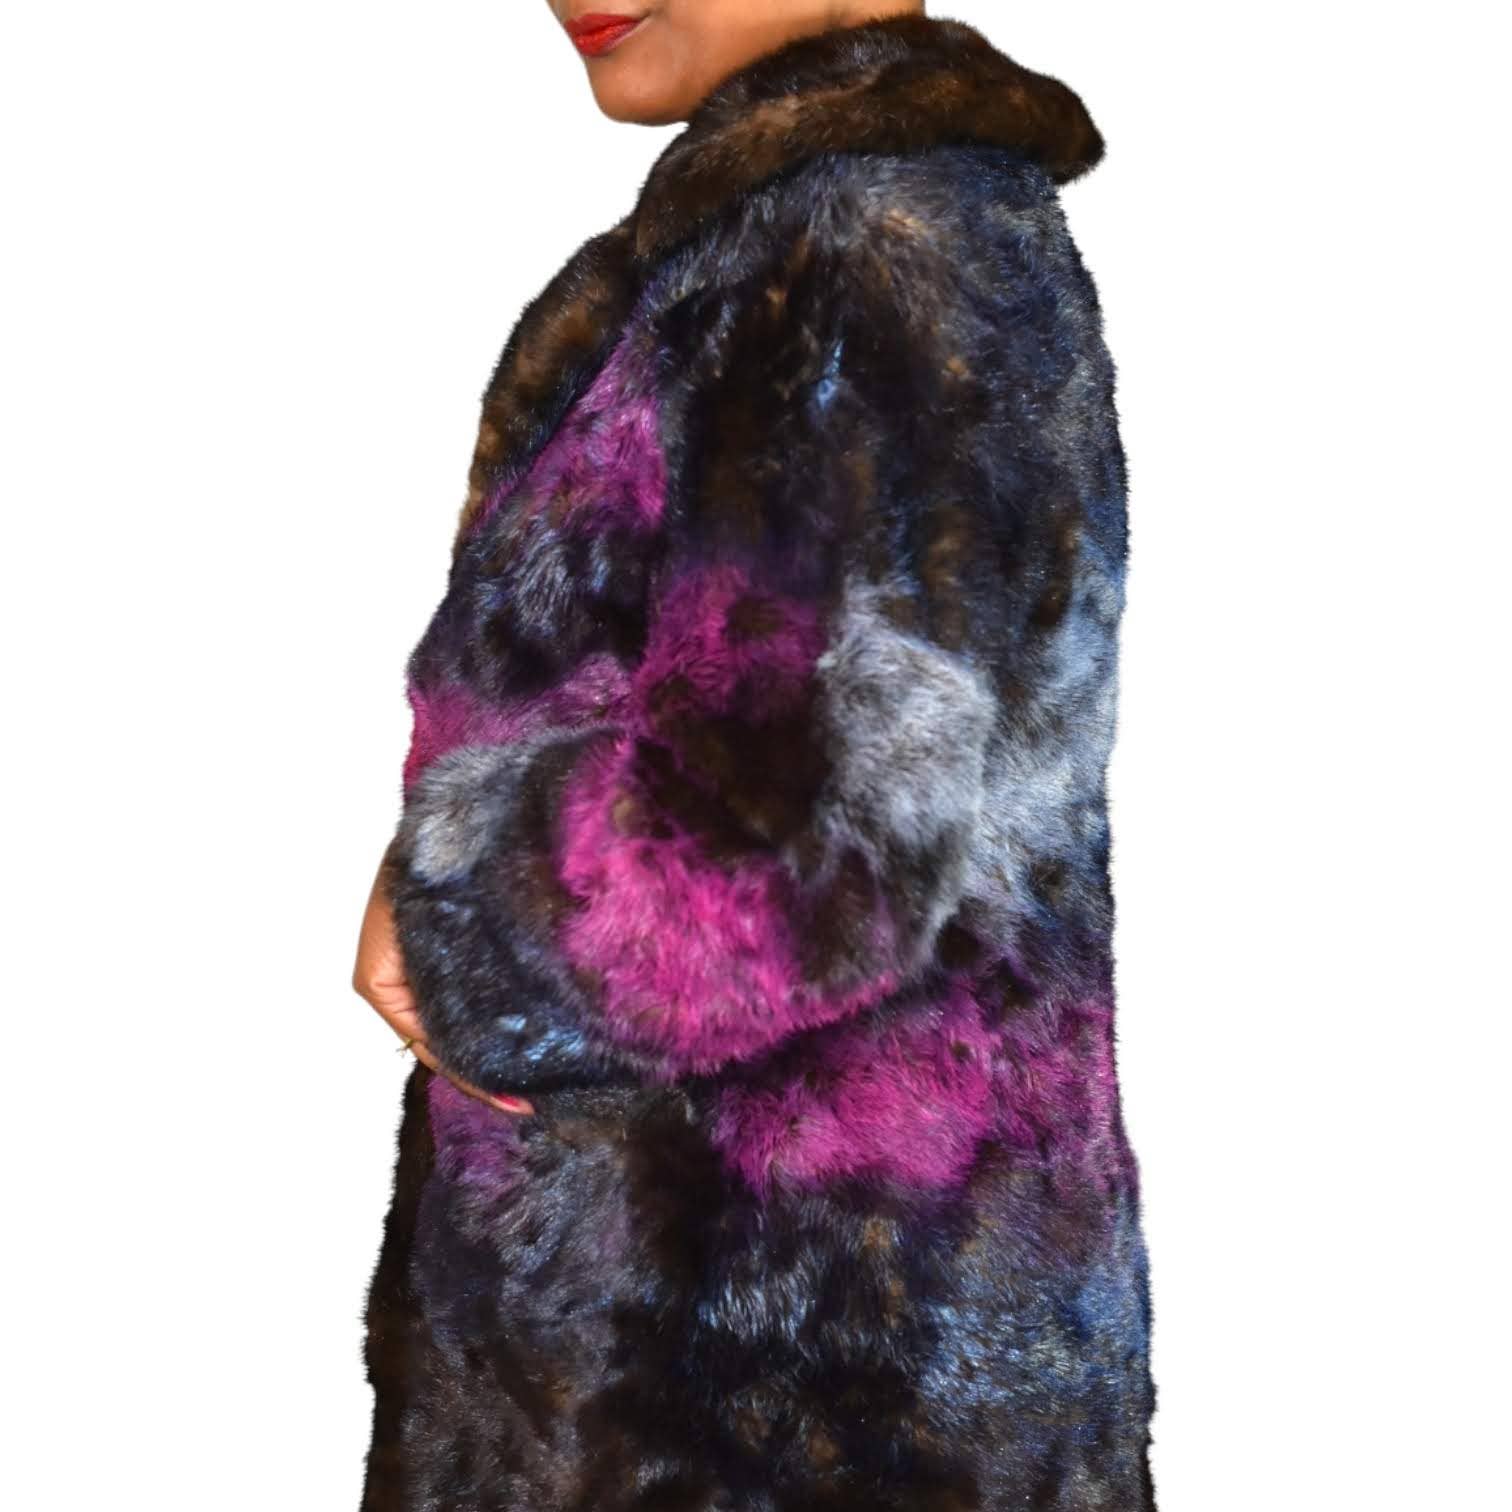 Vintage Fur Coat Painted Brown DIY ReFashion ReWorked Pink Recycled 60s Size XS